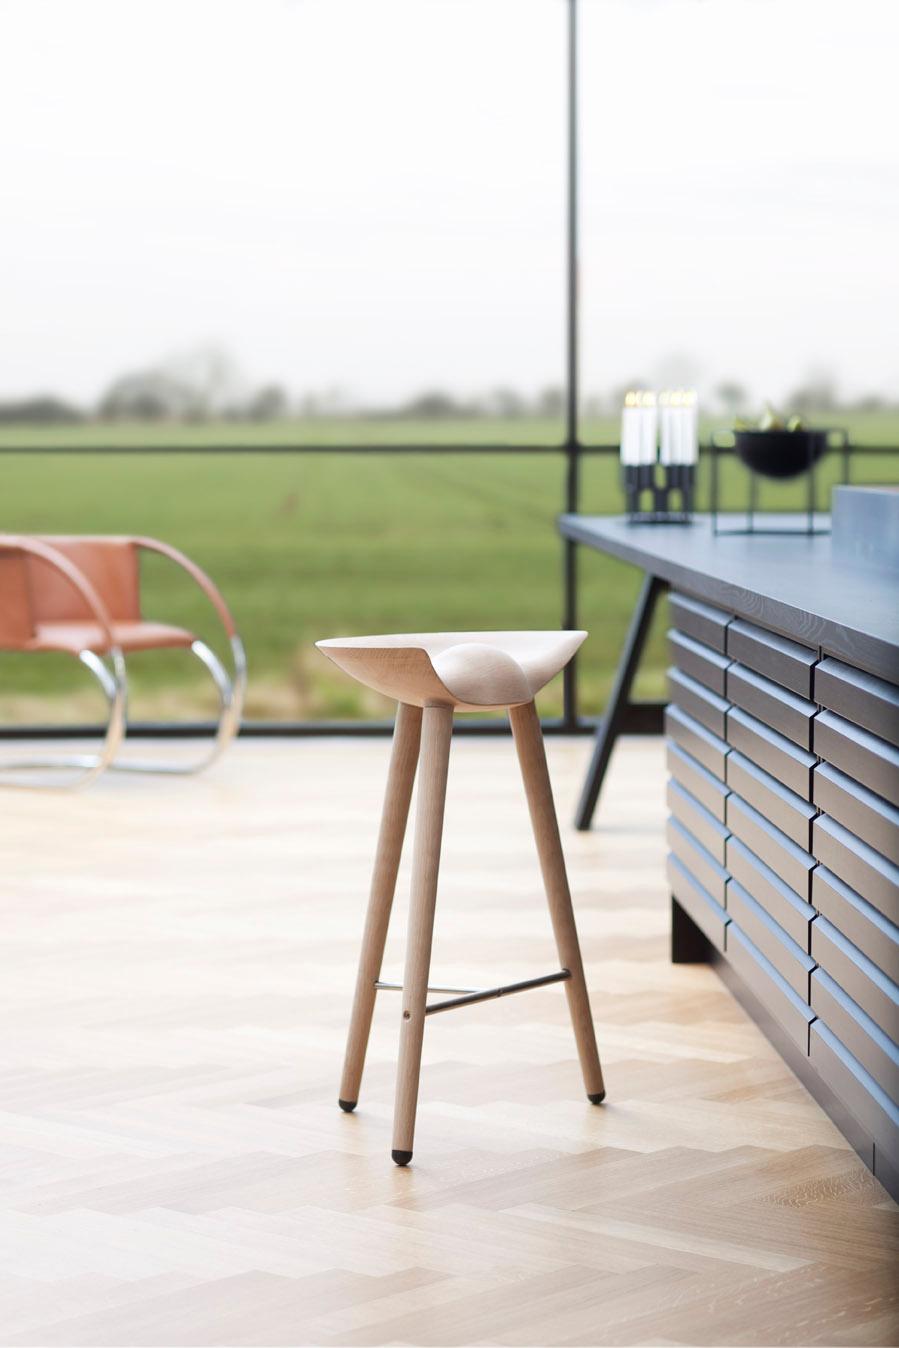 ML 42 Black beech and stainless steel counter stool by Lassen
Dimensions: H 69 x W 36 x L 55.5 cm
Materials: Beech, Stainless Steel

In 1942 Mogens Lassen designed the Stool ML42 as a piece for a furniture exhibition held at the Danish Museum of